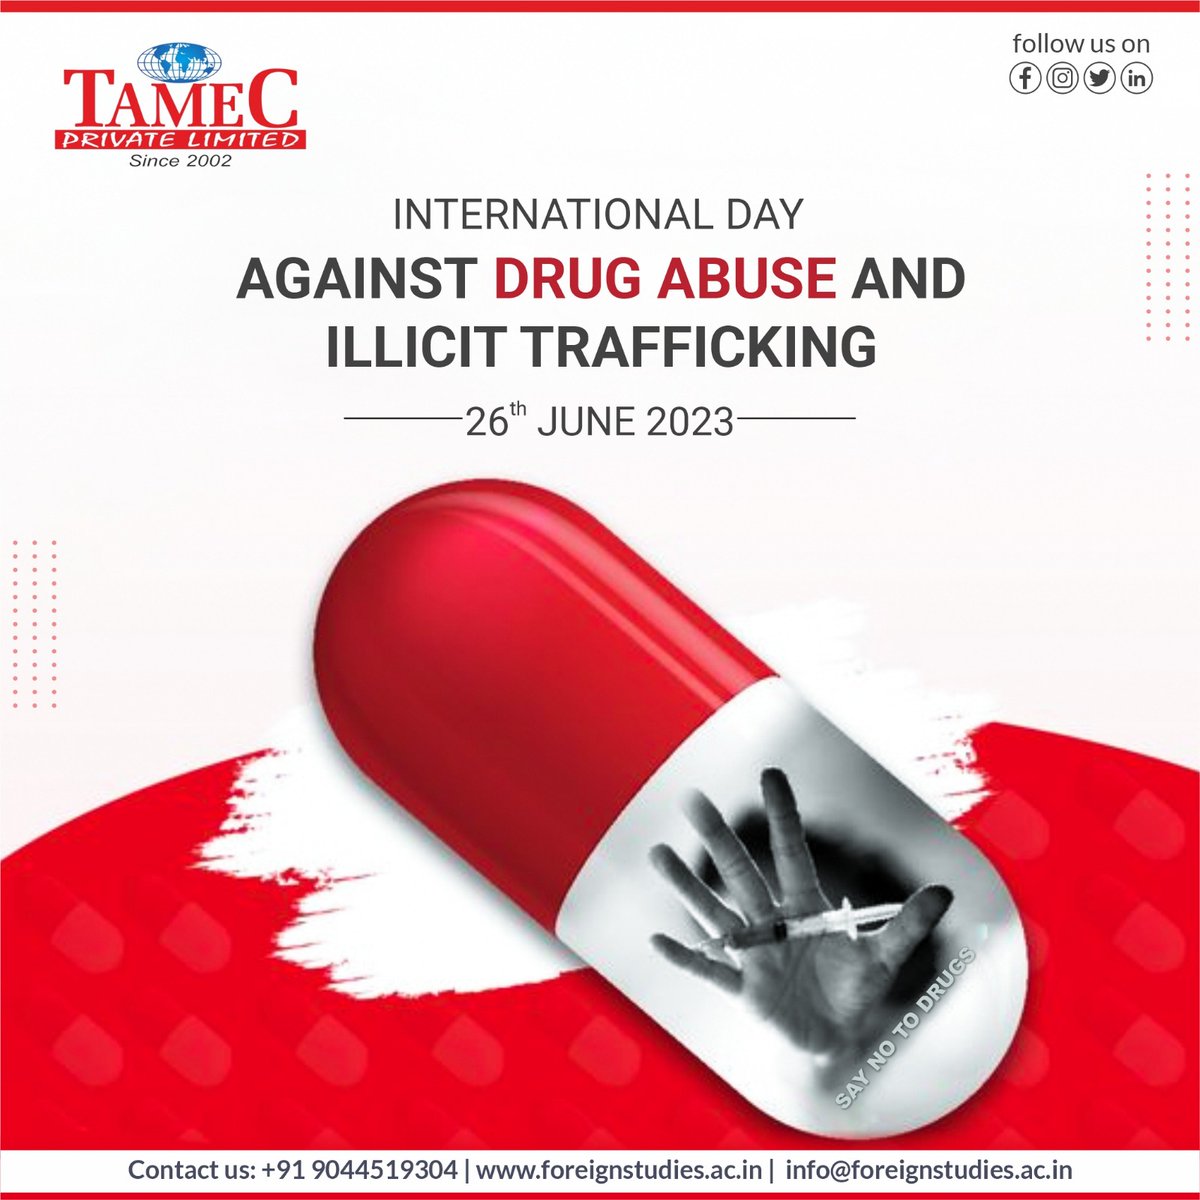 🚫 Take a Stand on International Day Against Drug Abuse and Illicit Trafficking! Educate, Advocate, and Create Awareness! 🌍
#DrugAbuseAwareness #SayNoToDrugs #EndDrugTrafficking #InternationalDayAgainstDrugAbuse #DrugFreeWorld #SubstanceAbusePrevention #TamecPrivateLimited